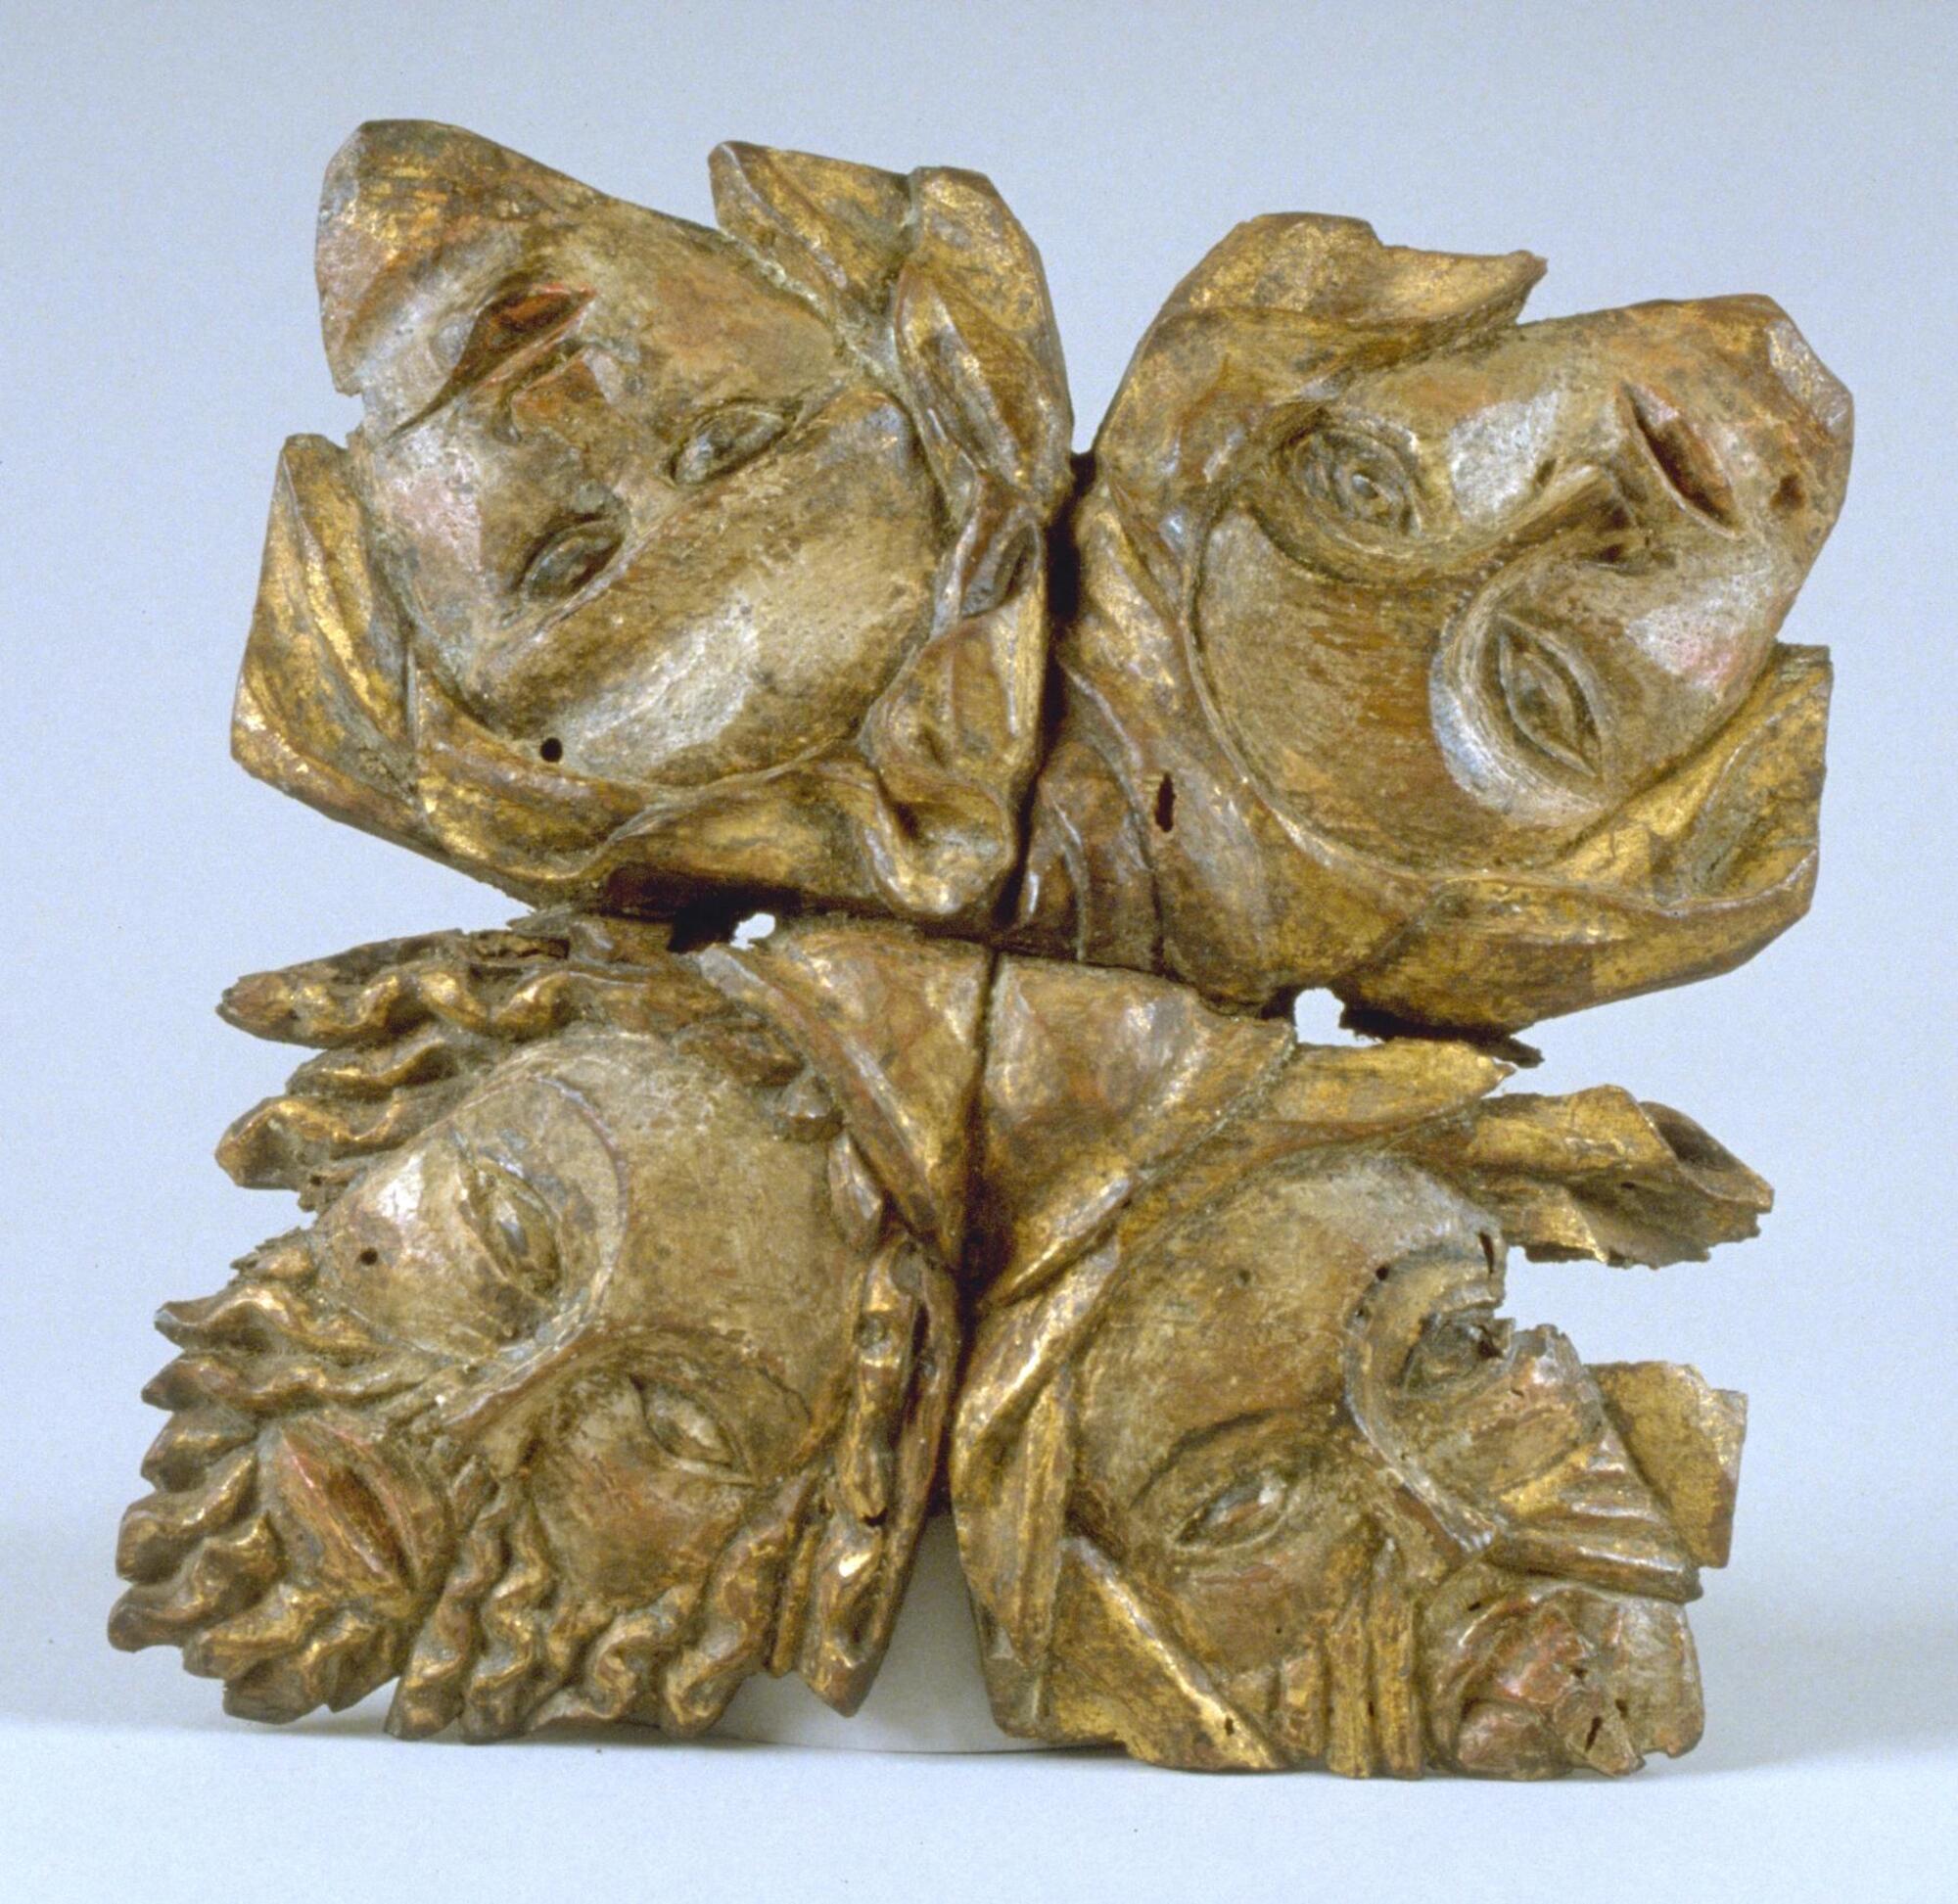 This ceiling boss features four faces with traces of paint that are arranged in a radial pattern with the crowns of their heads converging on a single, central point. Two of the faces are female, identifiable by the wimples worn on their heads, while the other two, wearing small pointed caps and sporting beards, are male. The symmetrical regularity of the piece is counterbalanced by subtle asymmetries introduced by differences in detail and the sequence of facial types.